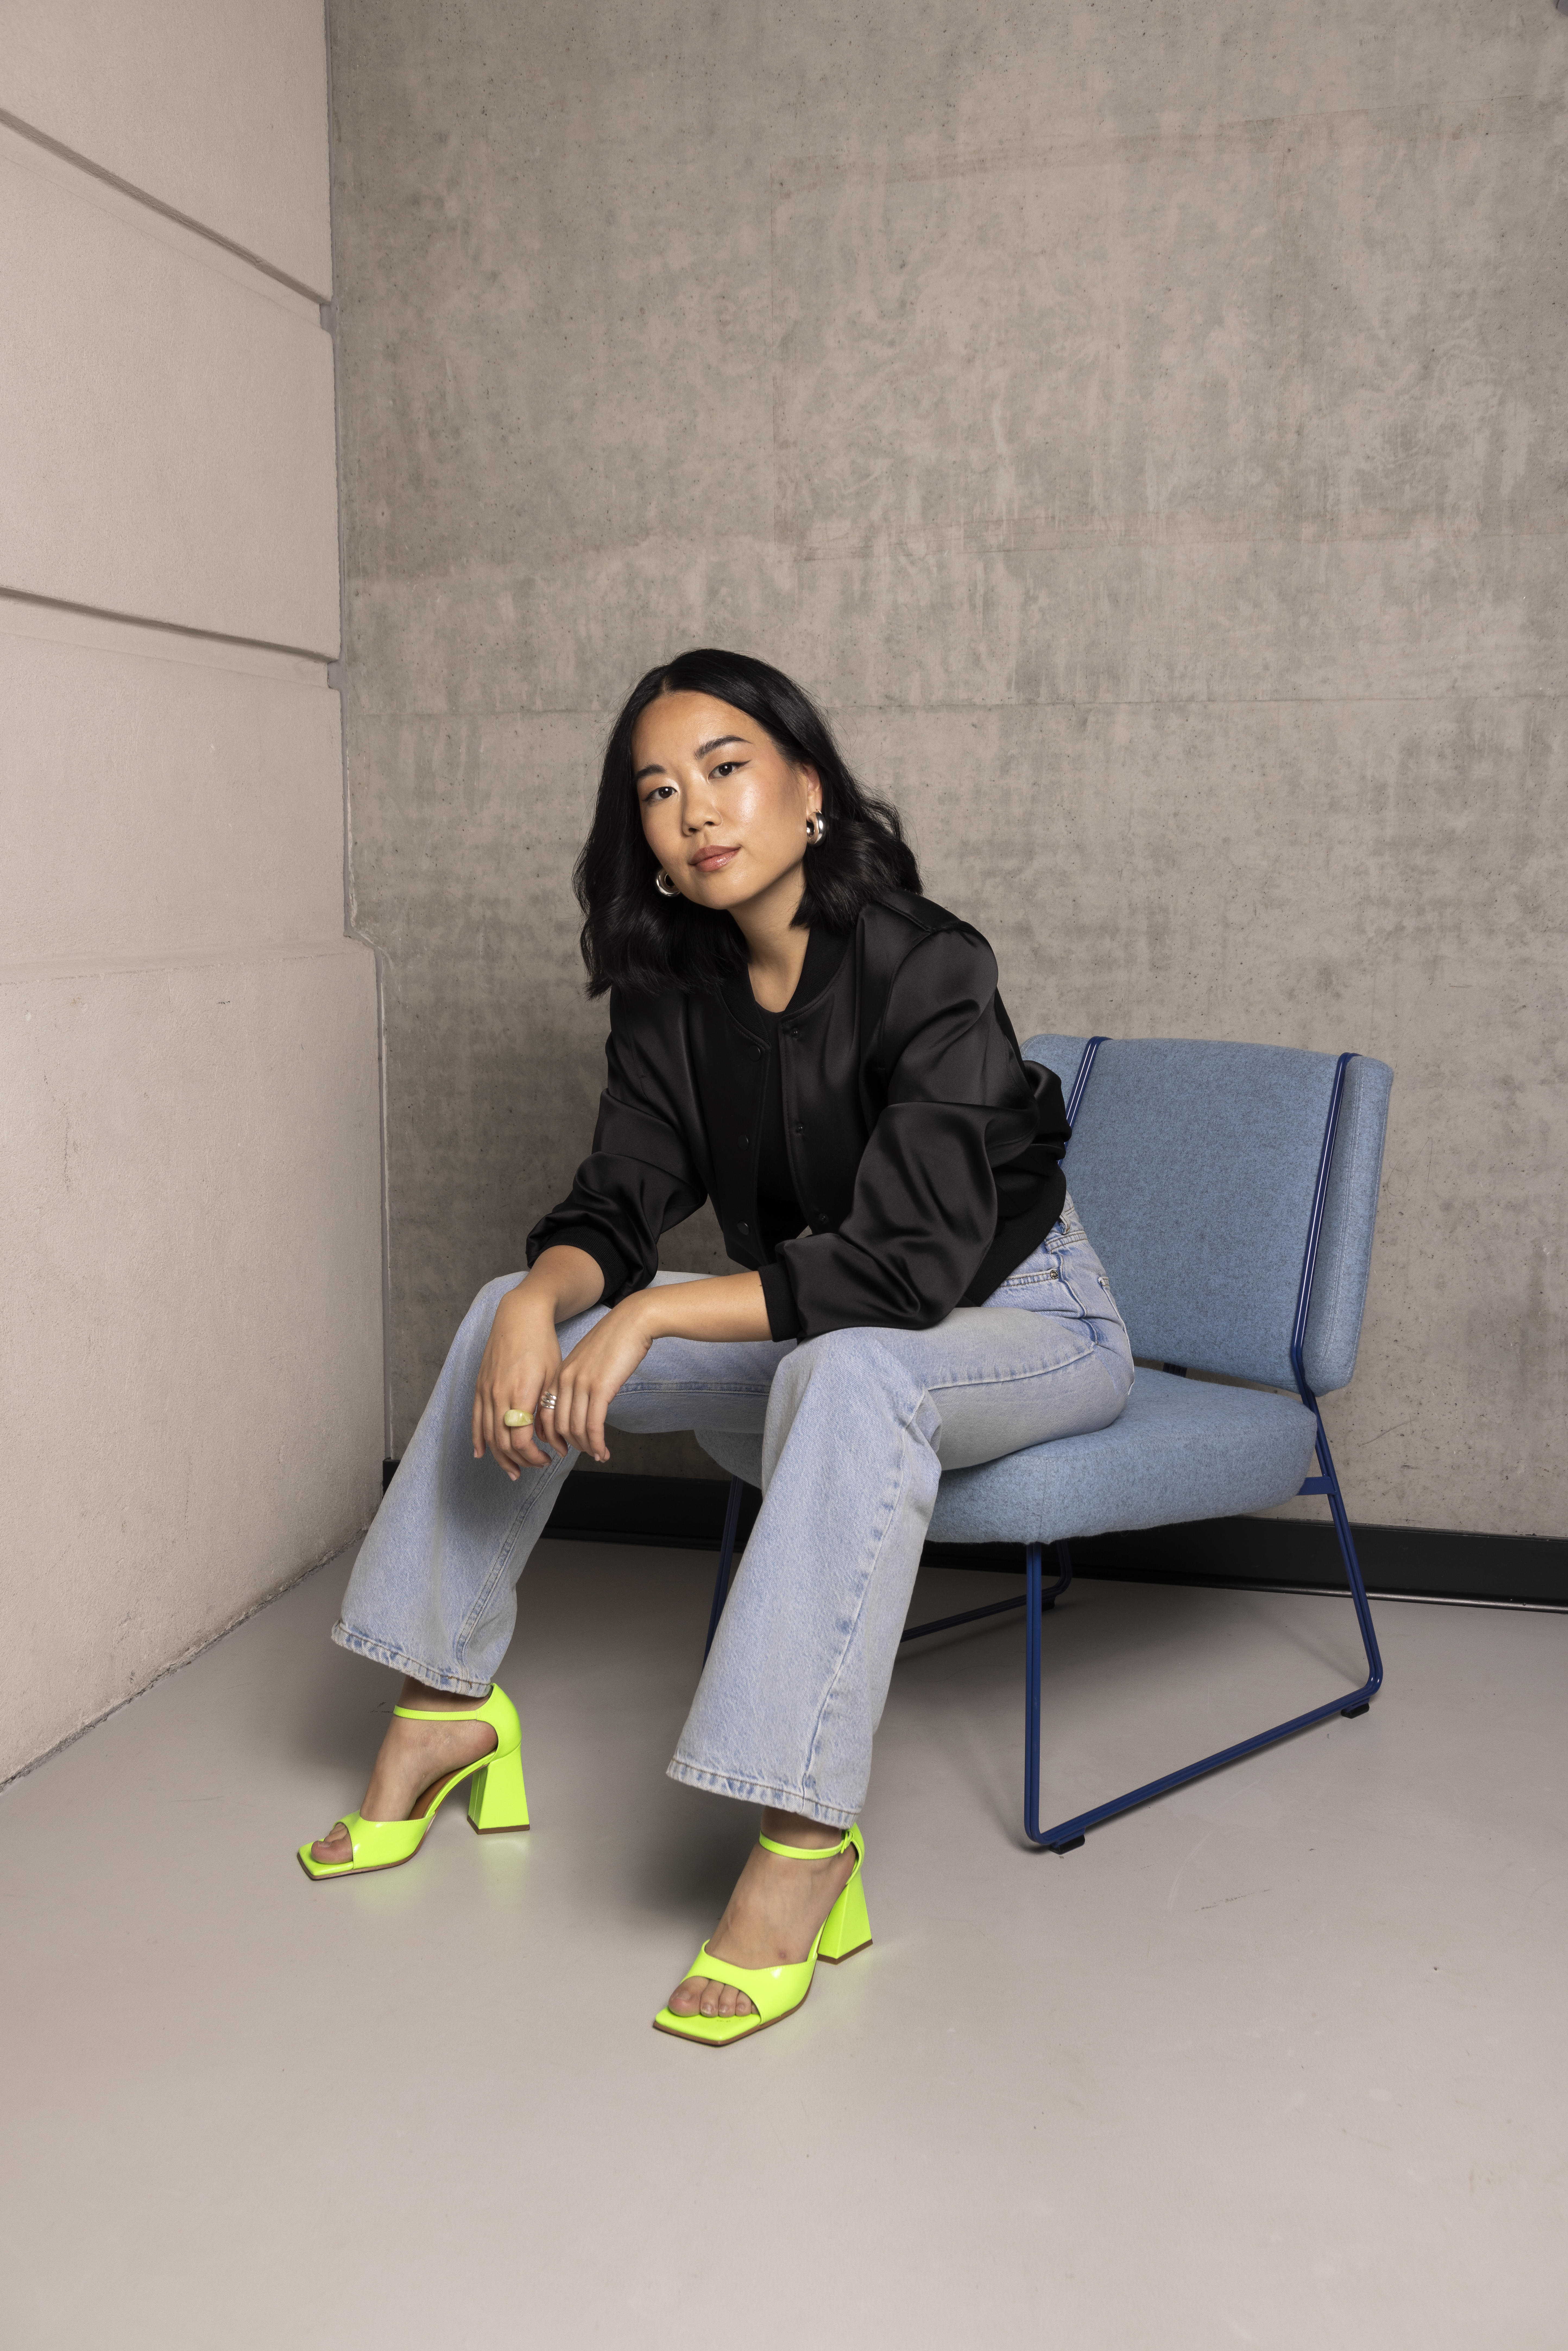 Conny Zhang, Head of Music bei Spotify DACH, im Interview